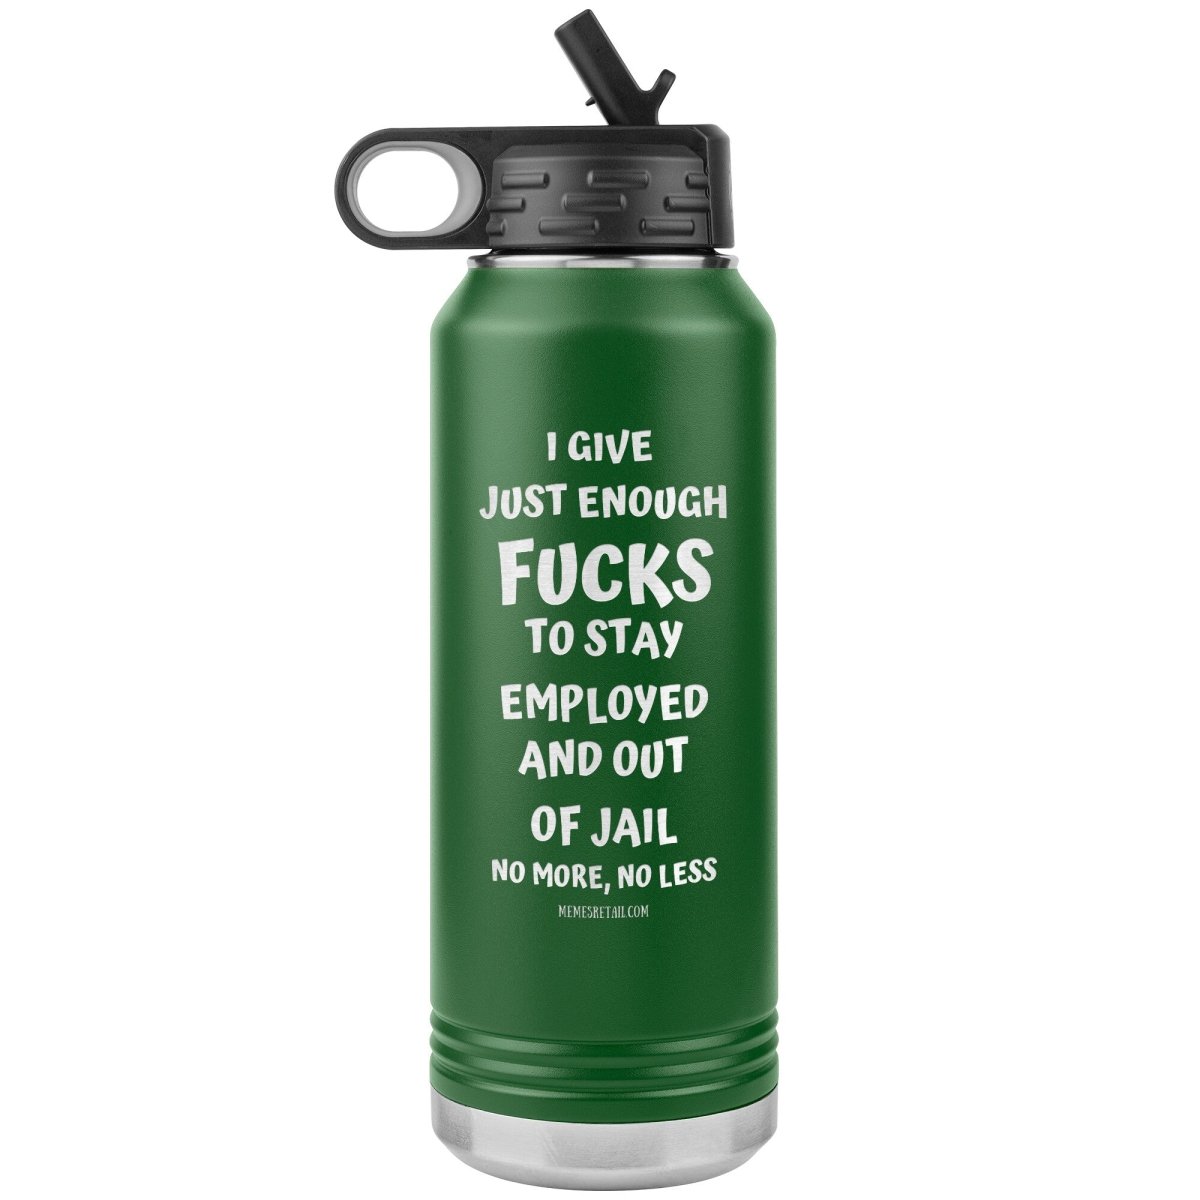 I Give Just Enough Fucks To Stay Employed And Out Of Jail, No More, No Less 32 Oz Water Bottle Tumbler, Green - MemesRetail.com